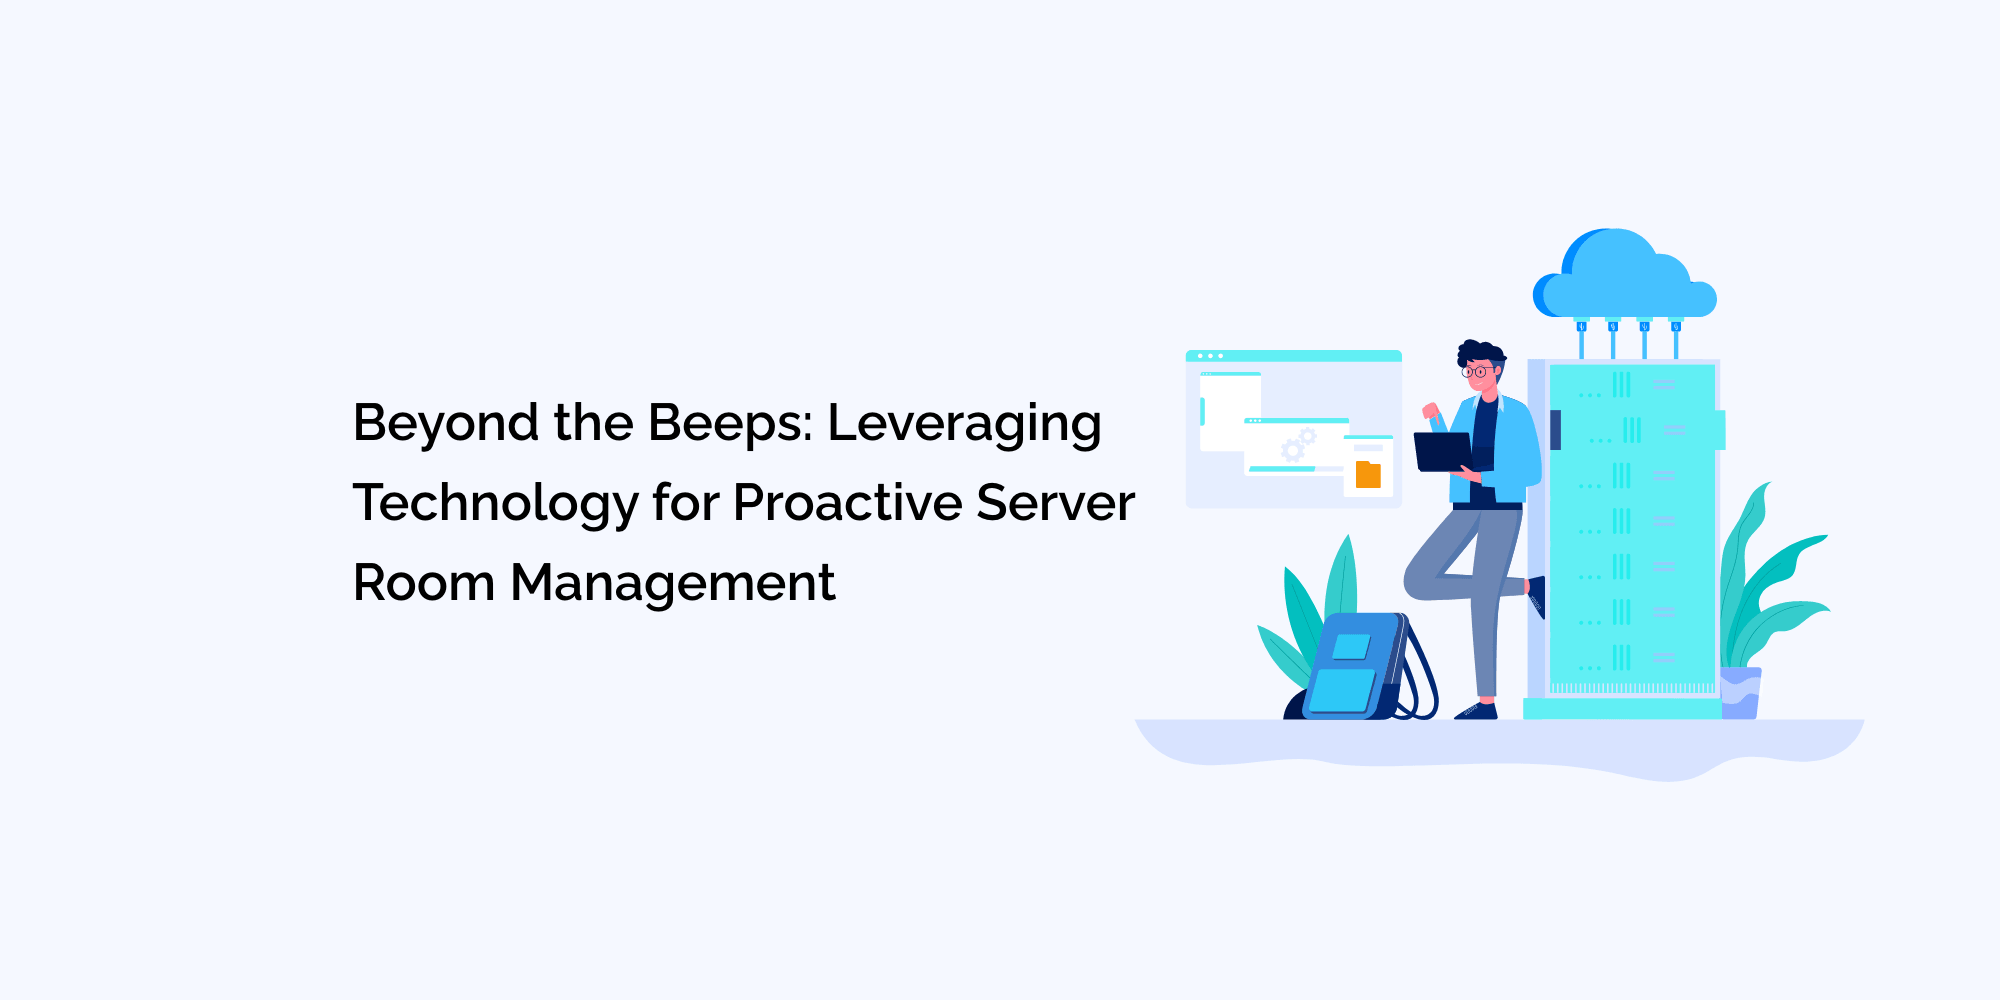 Beyond the Beeps: Leveraging Technology for Proactive Server Room Management